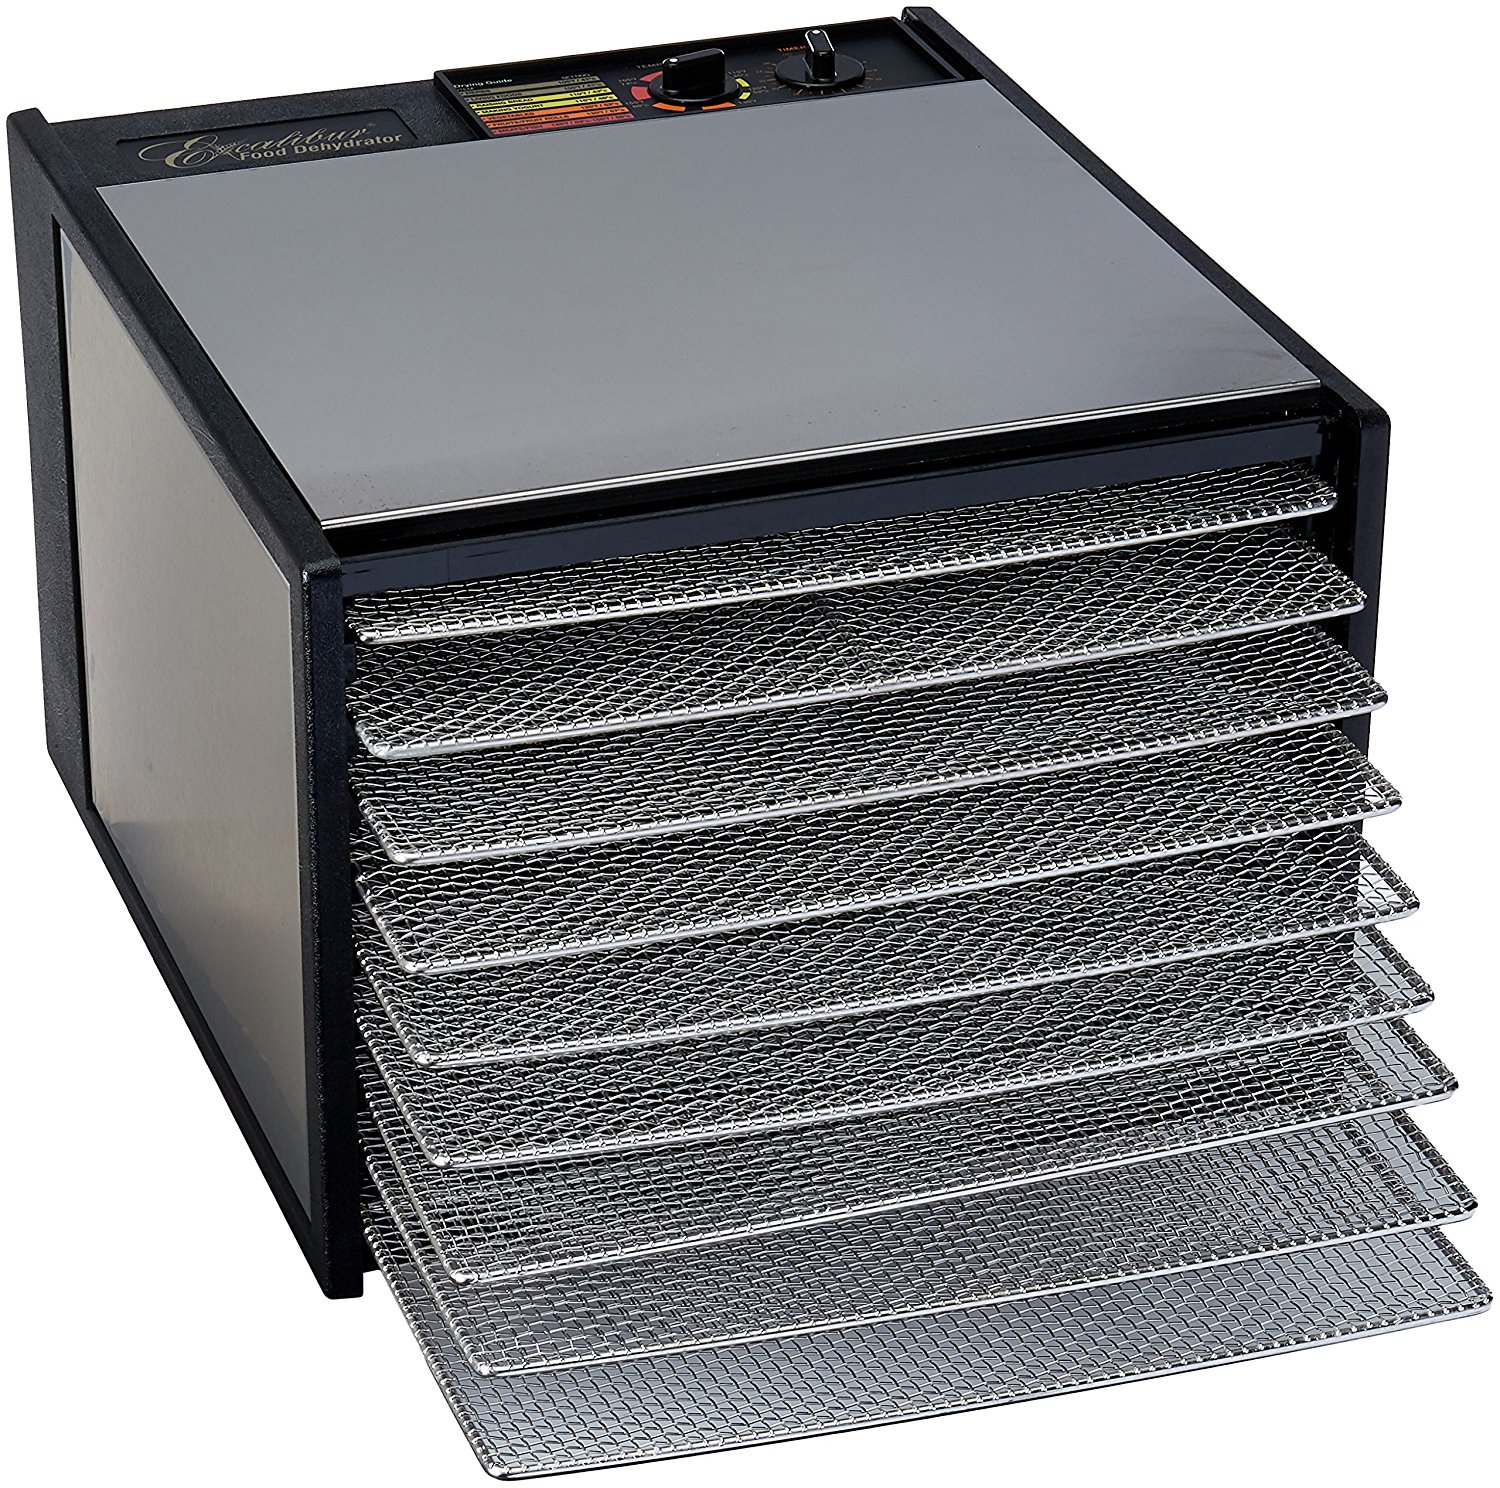 https://www.plantbasedpros.com/wp-content/uploads/2018/01/Excalibur-9-Tray-Stainless-Steel-Dehydrator-Stainless-Steel-Trays-and-Door-Model-D900SHD-2.jpg